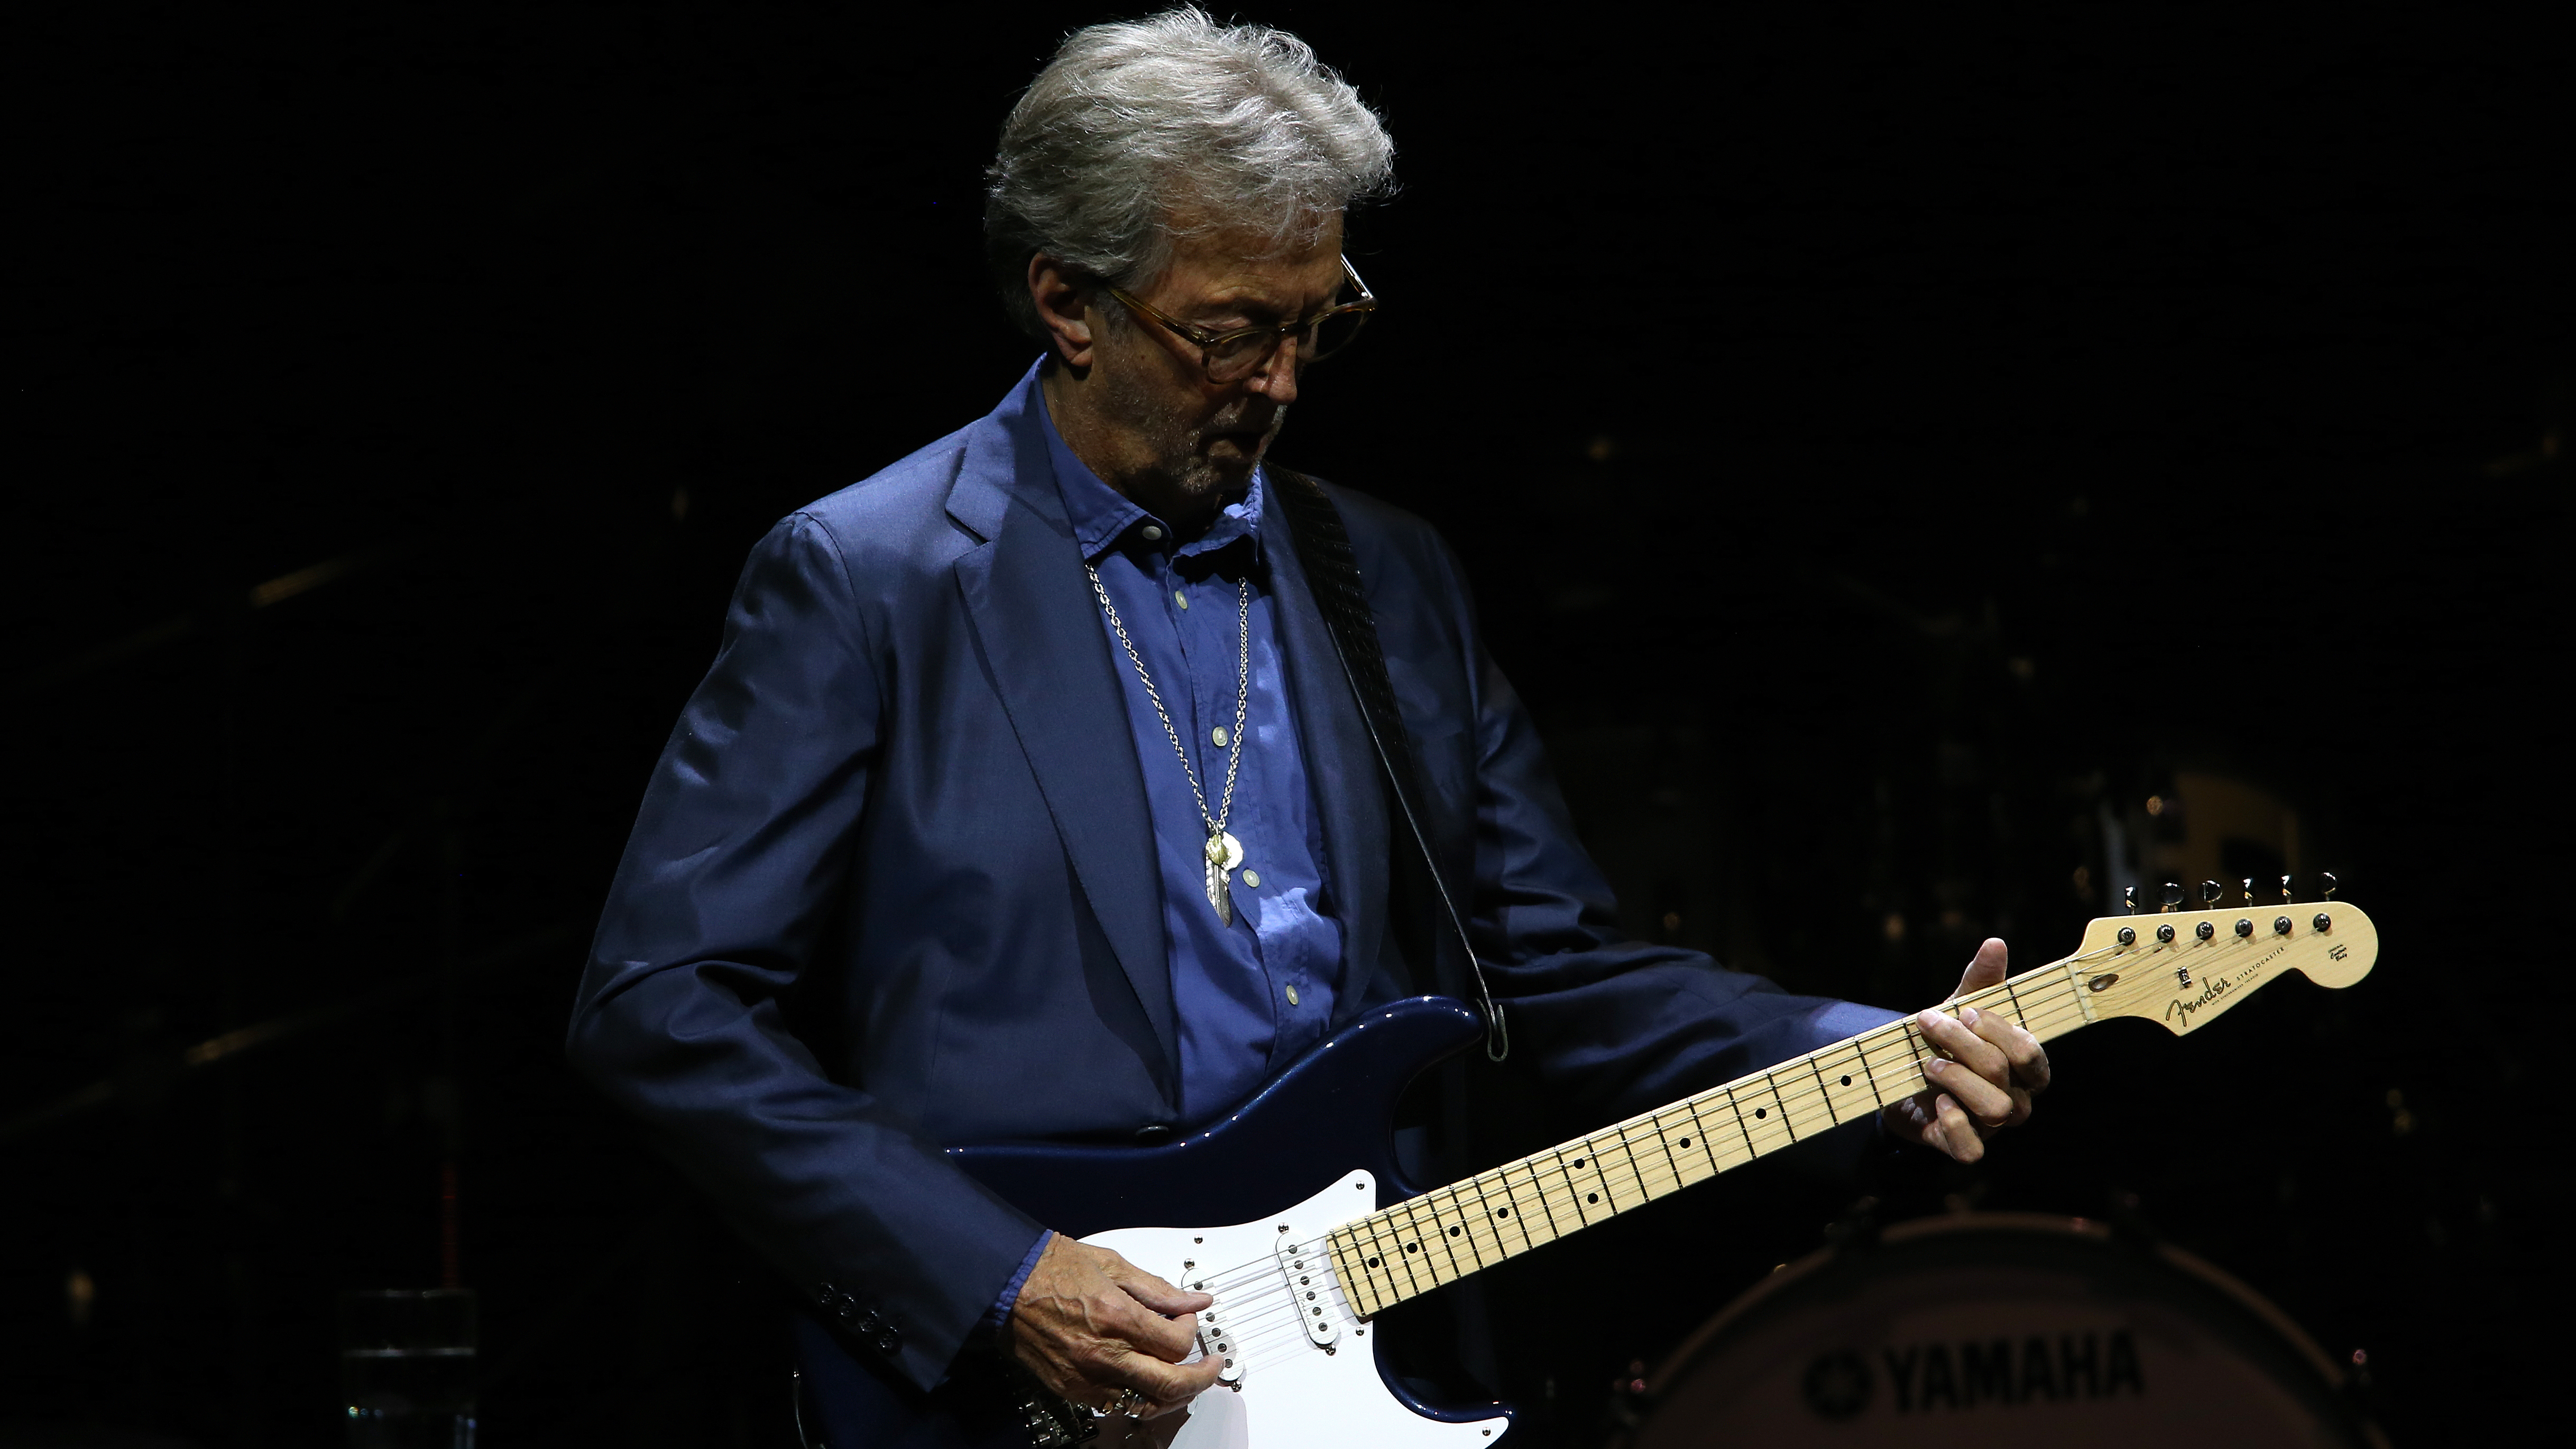 Eric Clapton - The Solo Years - Guitar Signature Licks